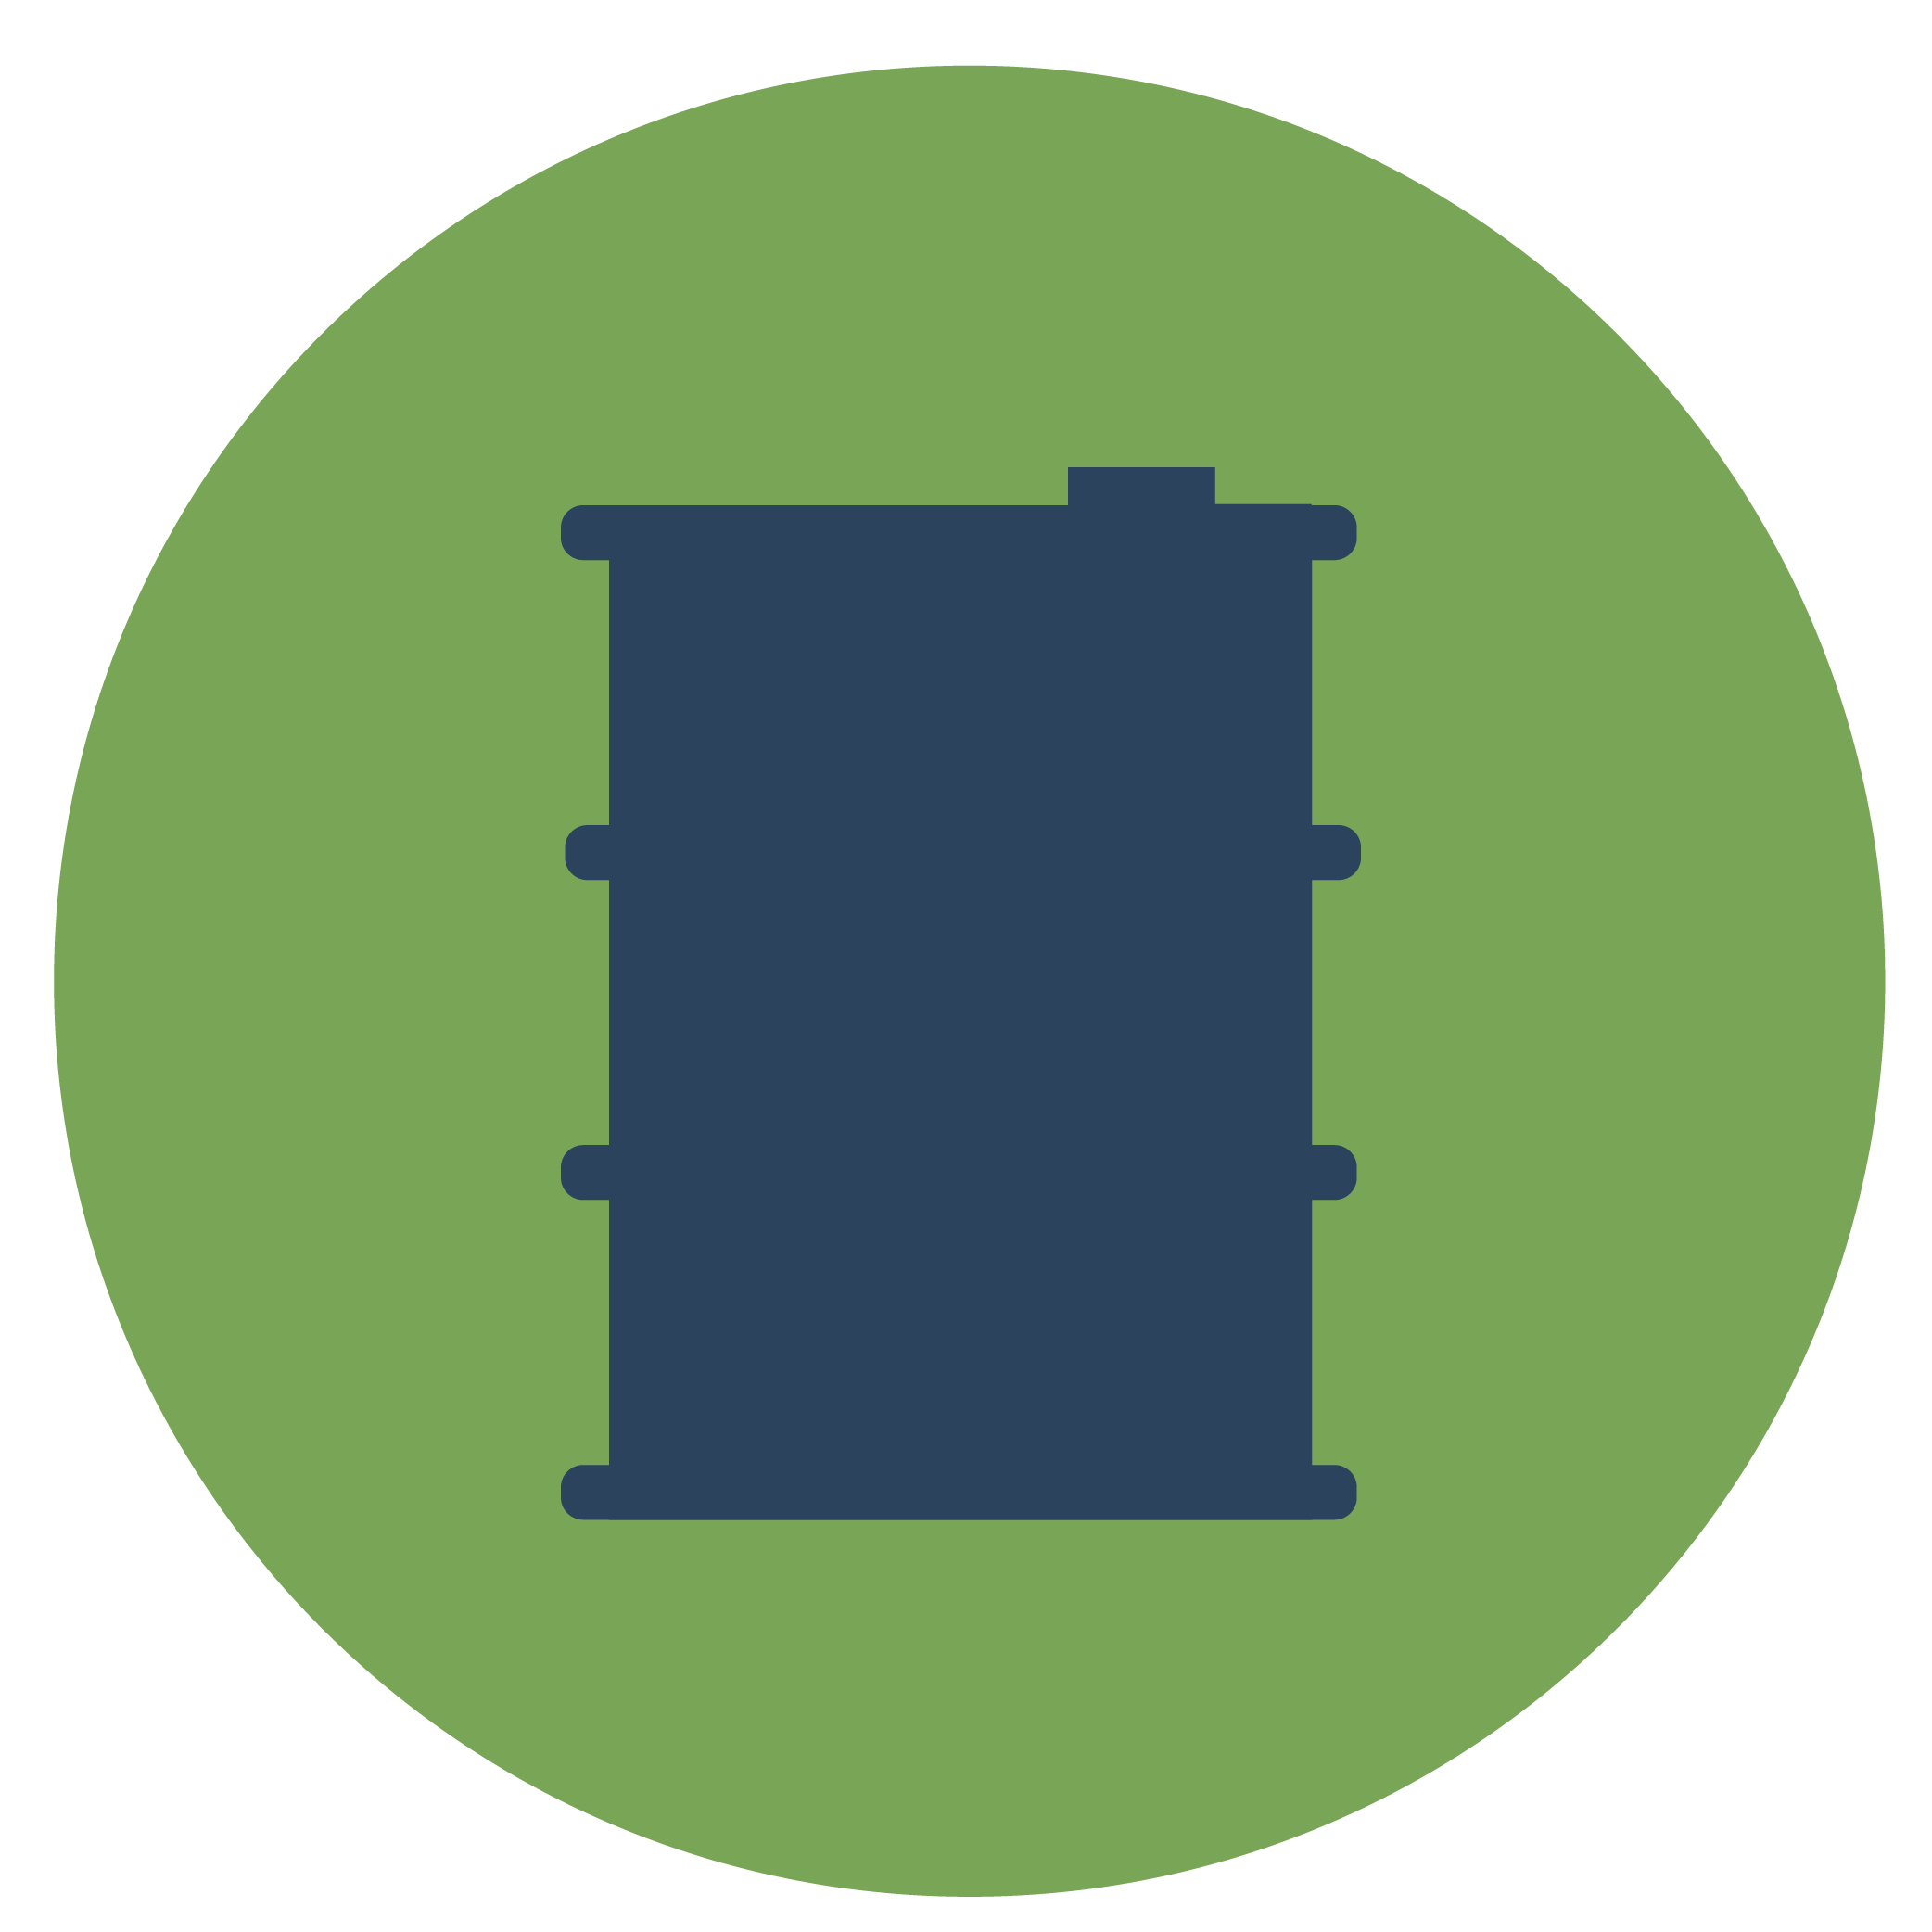 Barrel icon. Click to go to the Dangerous Waste page.